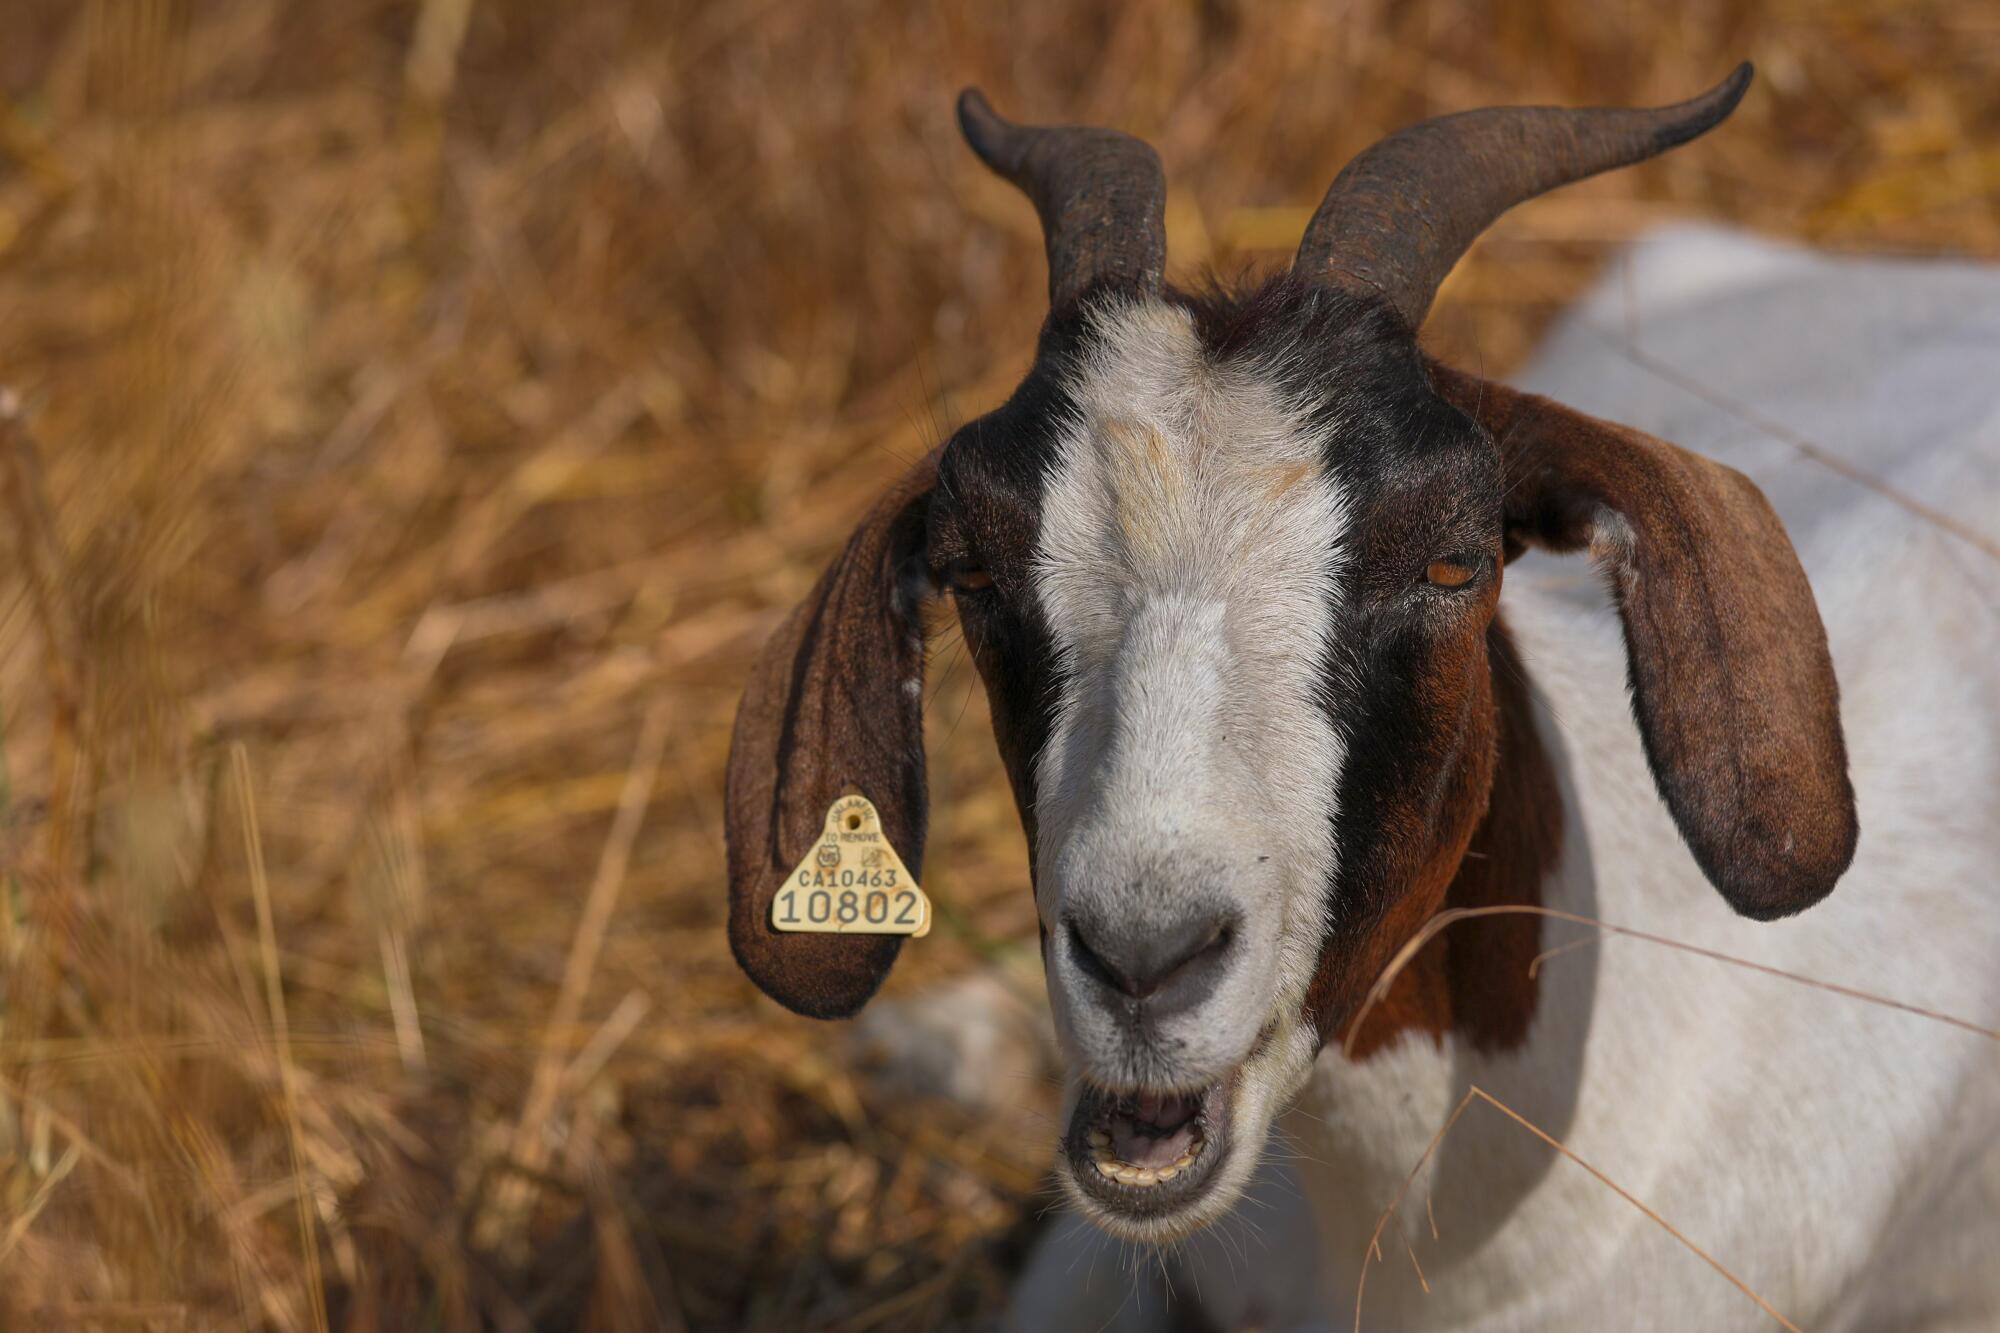 Meet Whittier's low-tech weed clearance tools: goats – Whittier Daily News